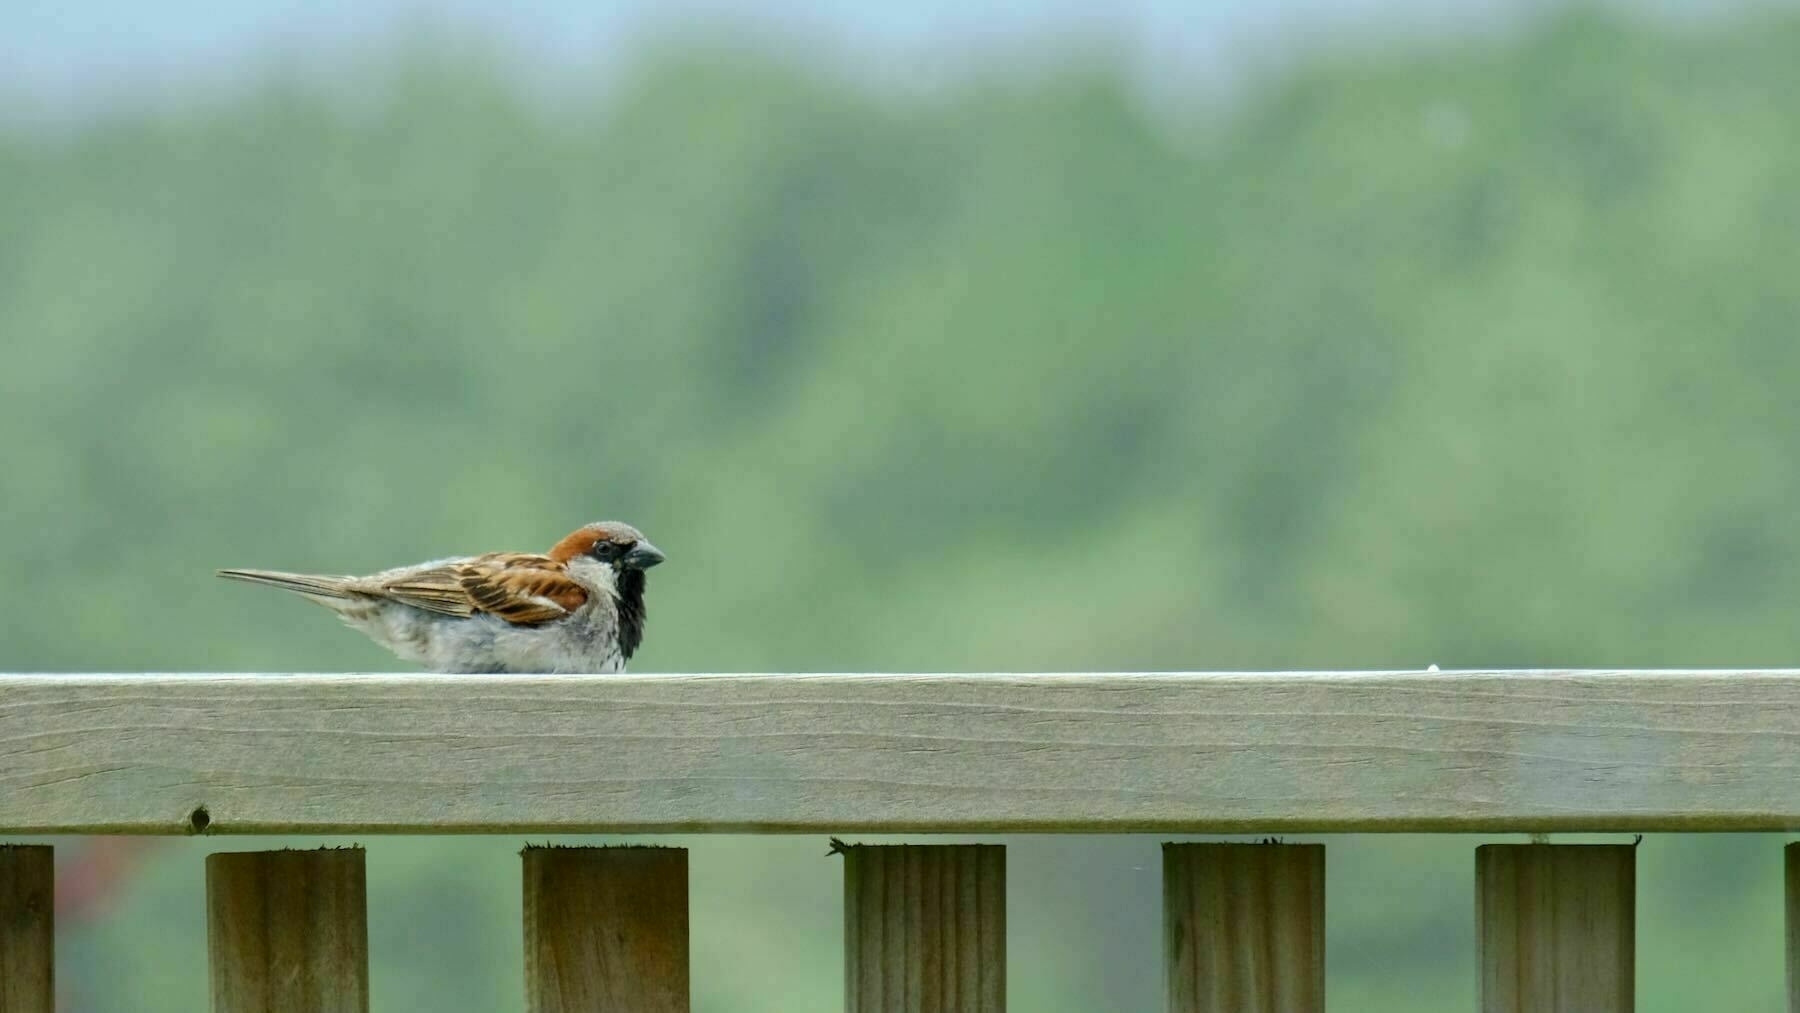 Sparrow sitting comfortably on a railing. 